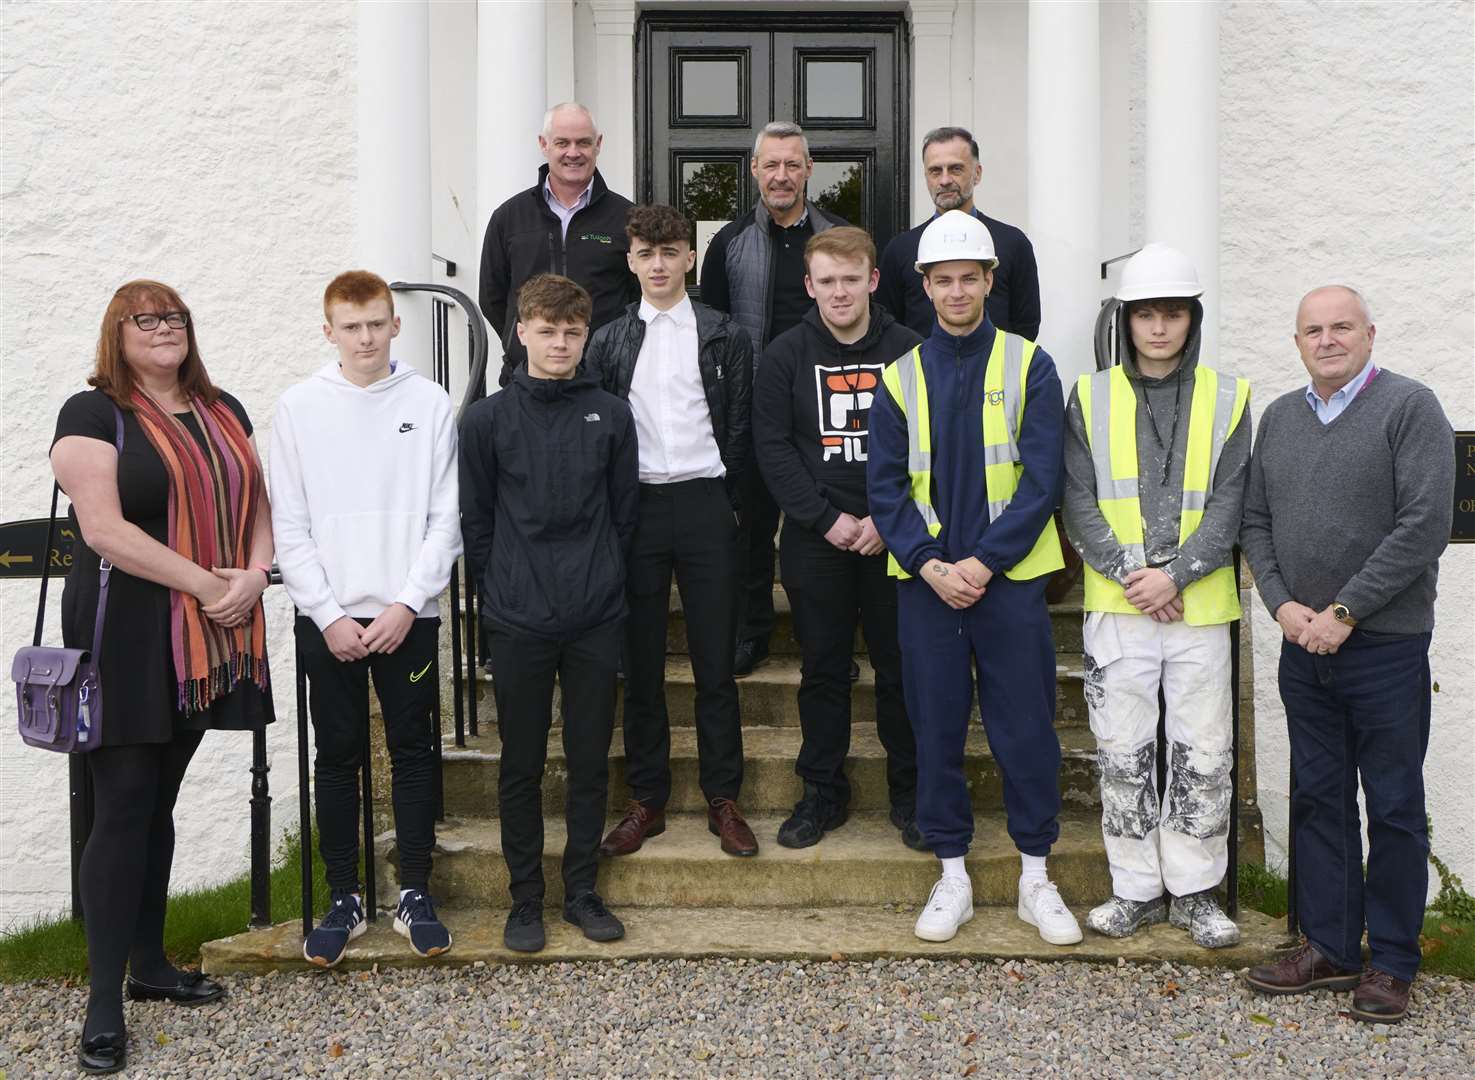 Tulloch Homes new starts and their mentors. Back row from left: Hugh MacGillivray, Gordon Macallister and Dave Macdonald. Front from left: Pauline Tuthill (Inverness College UHI), apprentices Scott Cameron, Arran Legge, Ronnie Fraser, Ewan Bremner, Riley Barclay and Dylan Lowry with David Patience (Inverness College UHI).